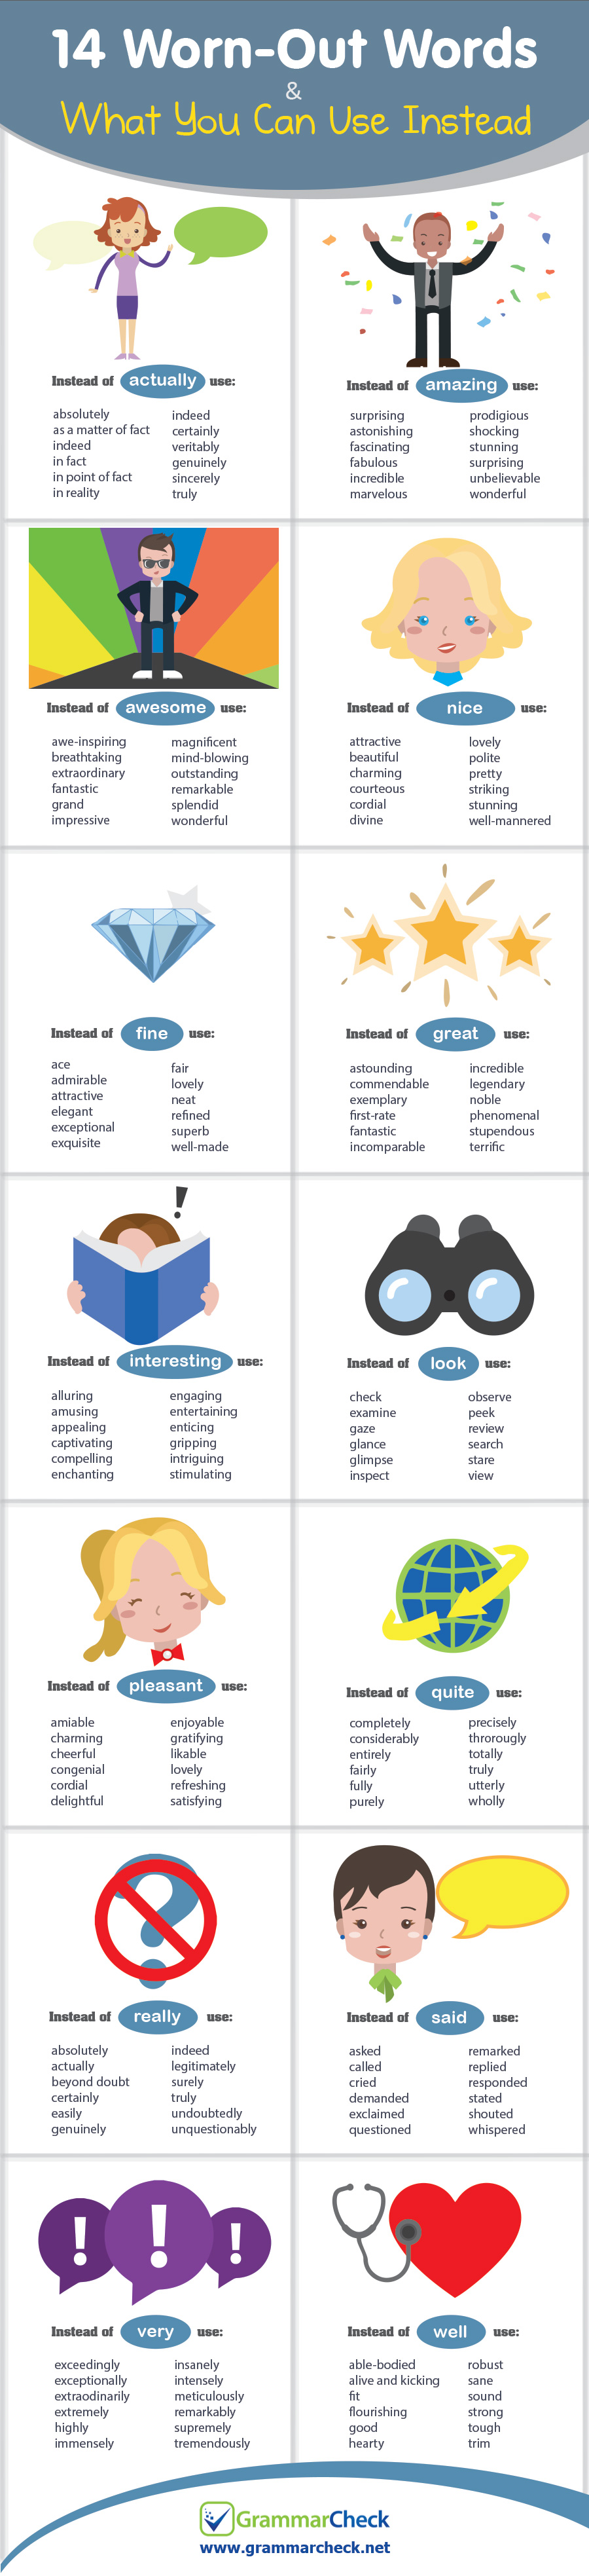 14 Worn-Out Words & What You Can Use Instead (Infographic)